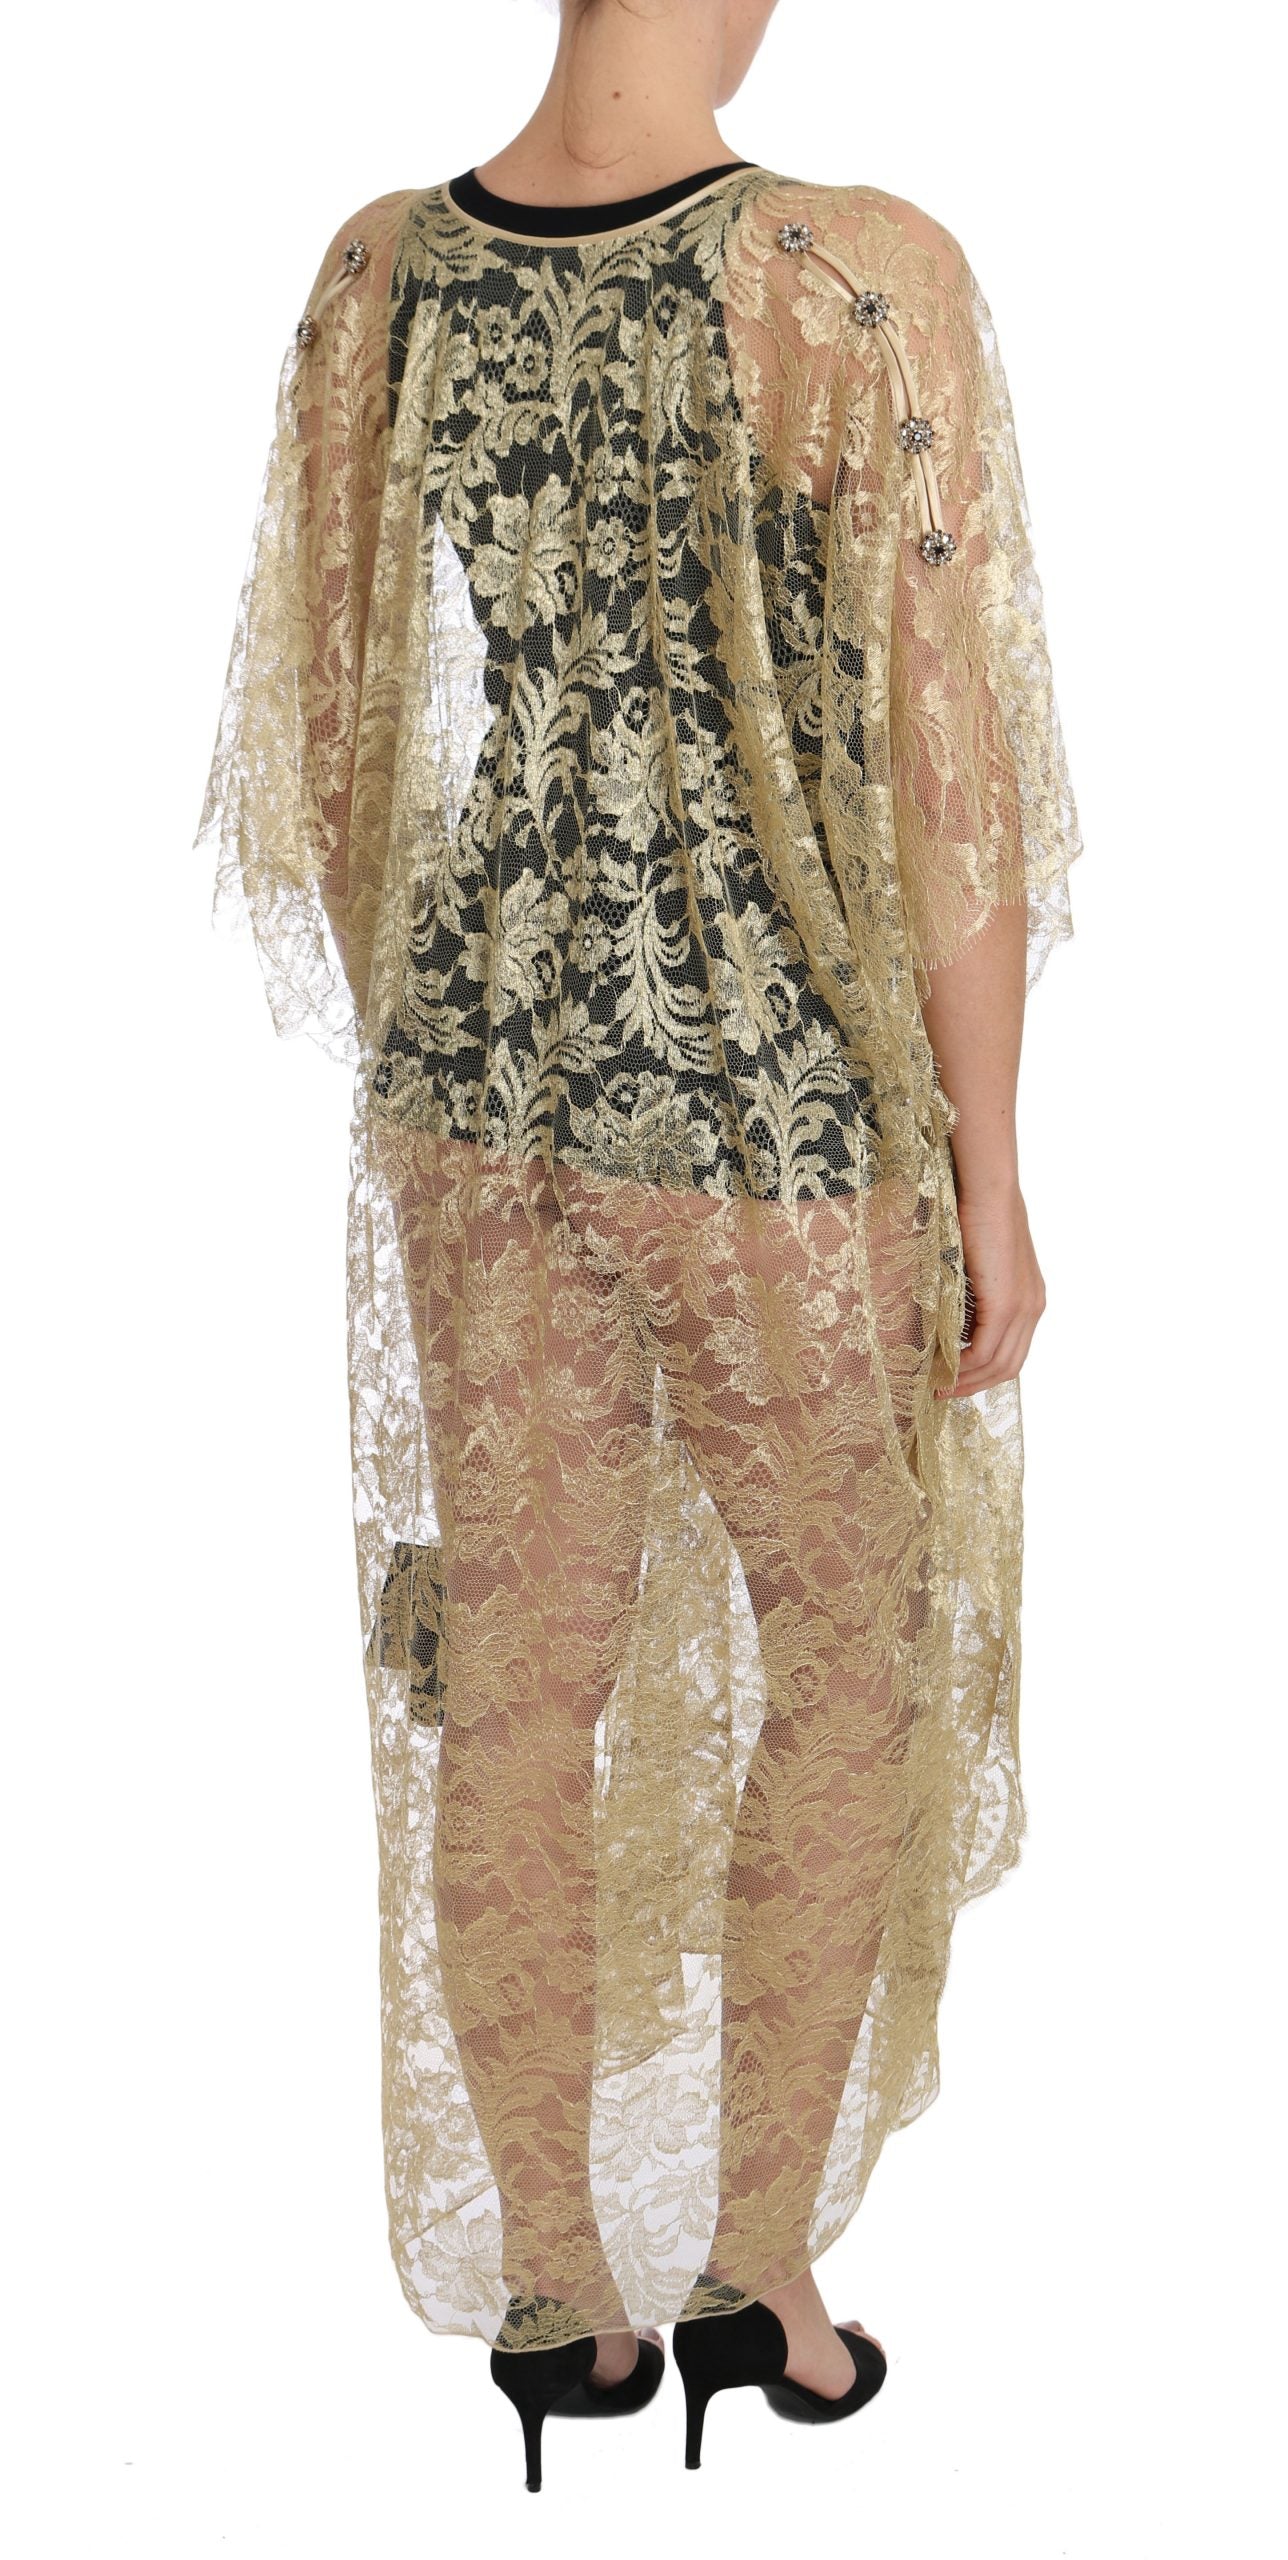 Gold Floral Lace Crystal Gown Cape Dress - Designed by Dolce & Gabbana Available to Buy at a Discounted Price on Moon Behind The Hill Online Designer Discount Store